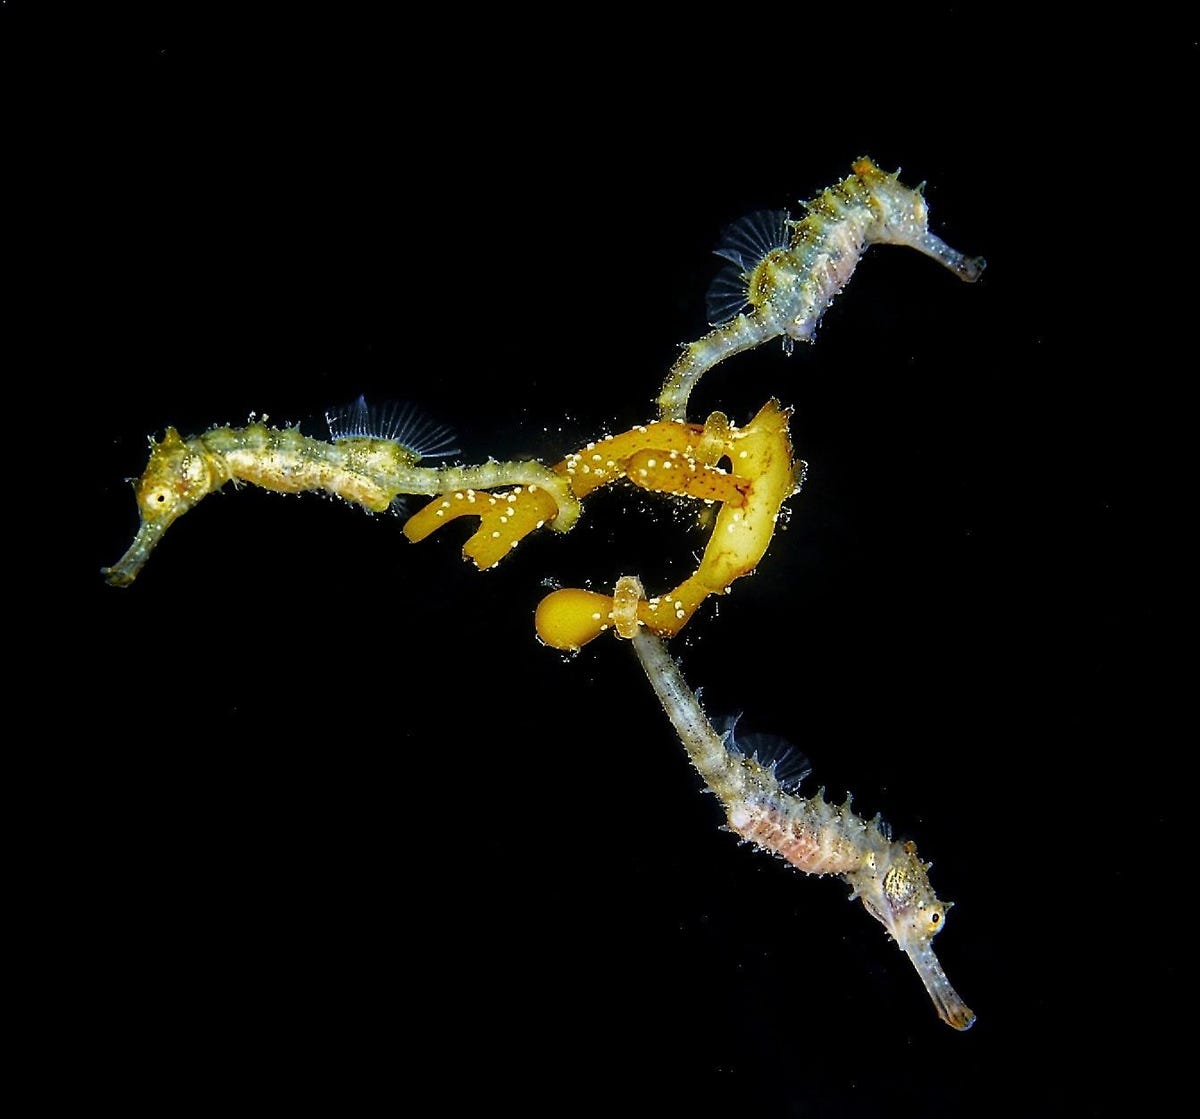 Three big-belly seahorse fry in the waters off Victoria, Australia.